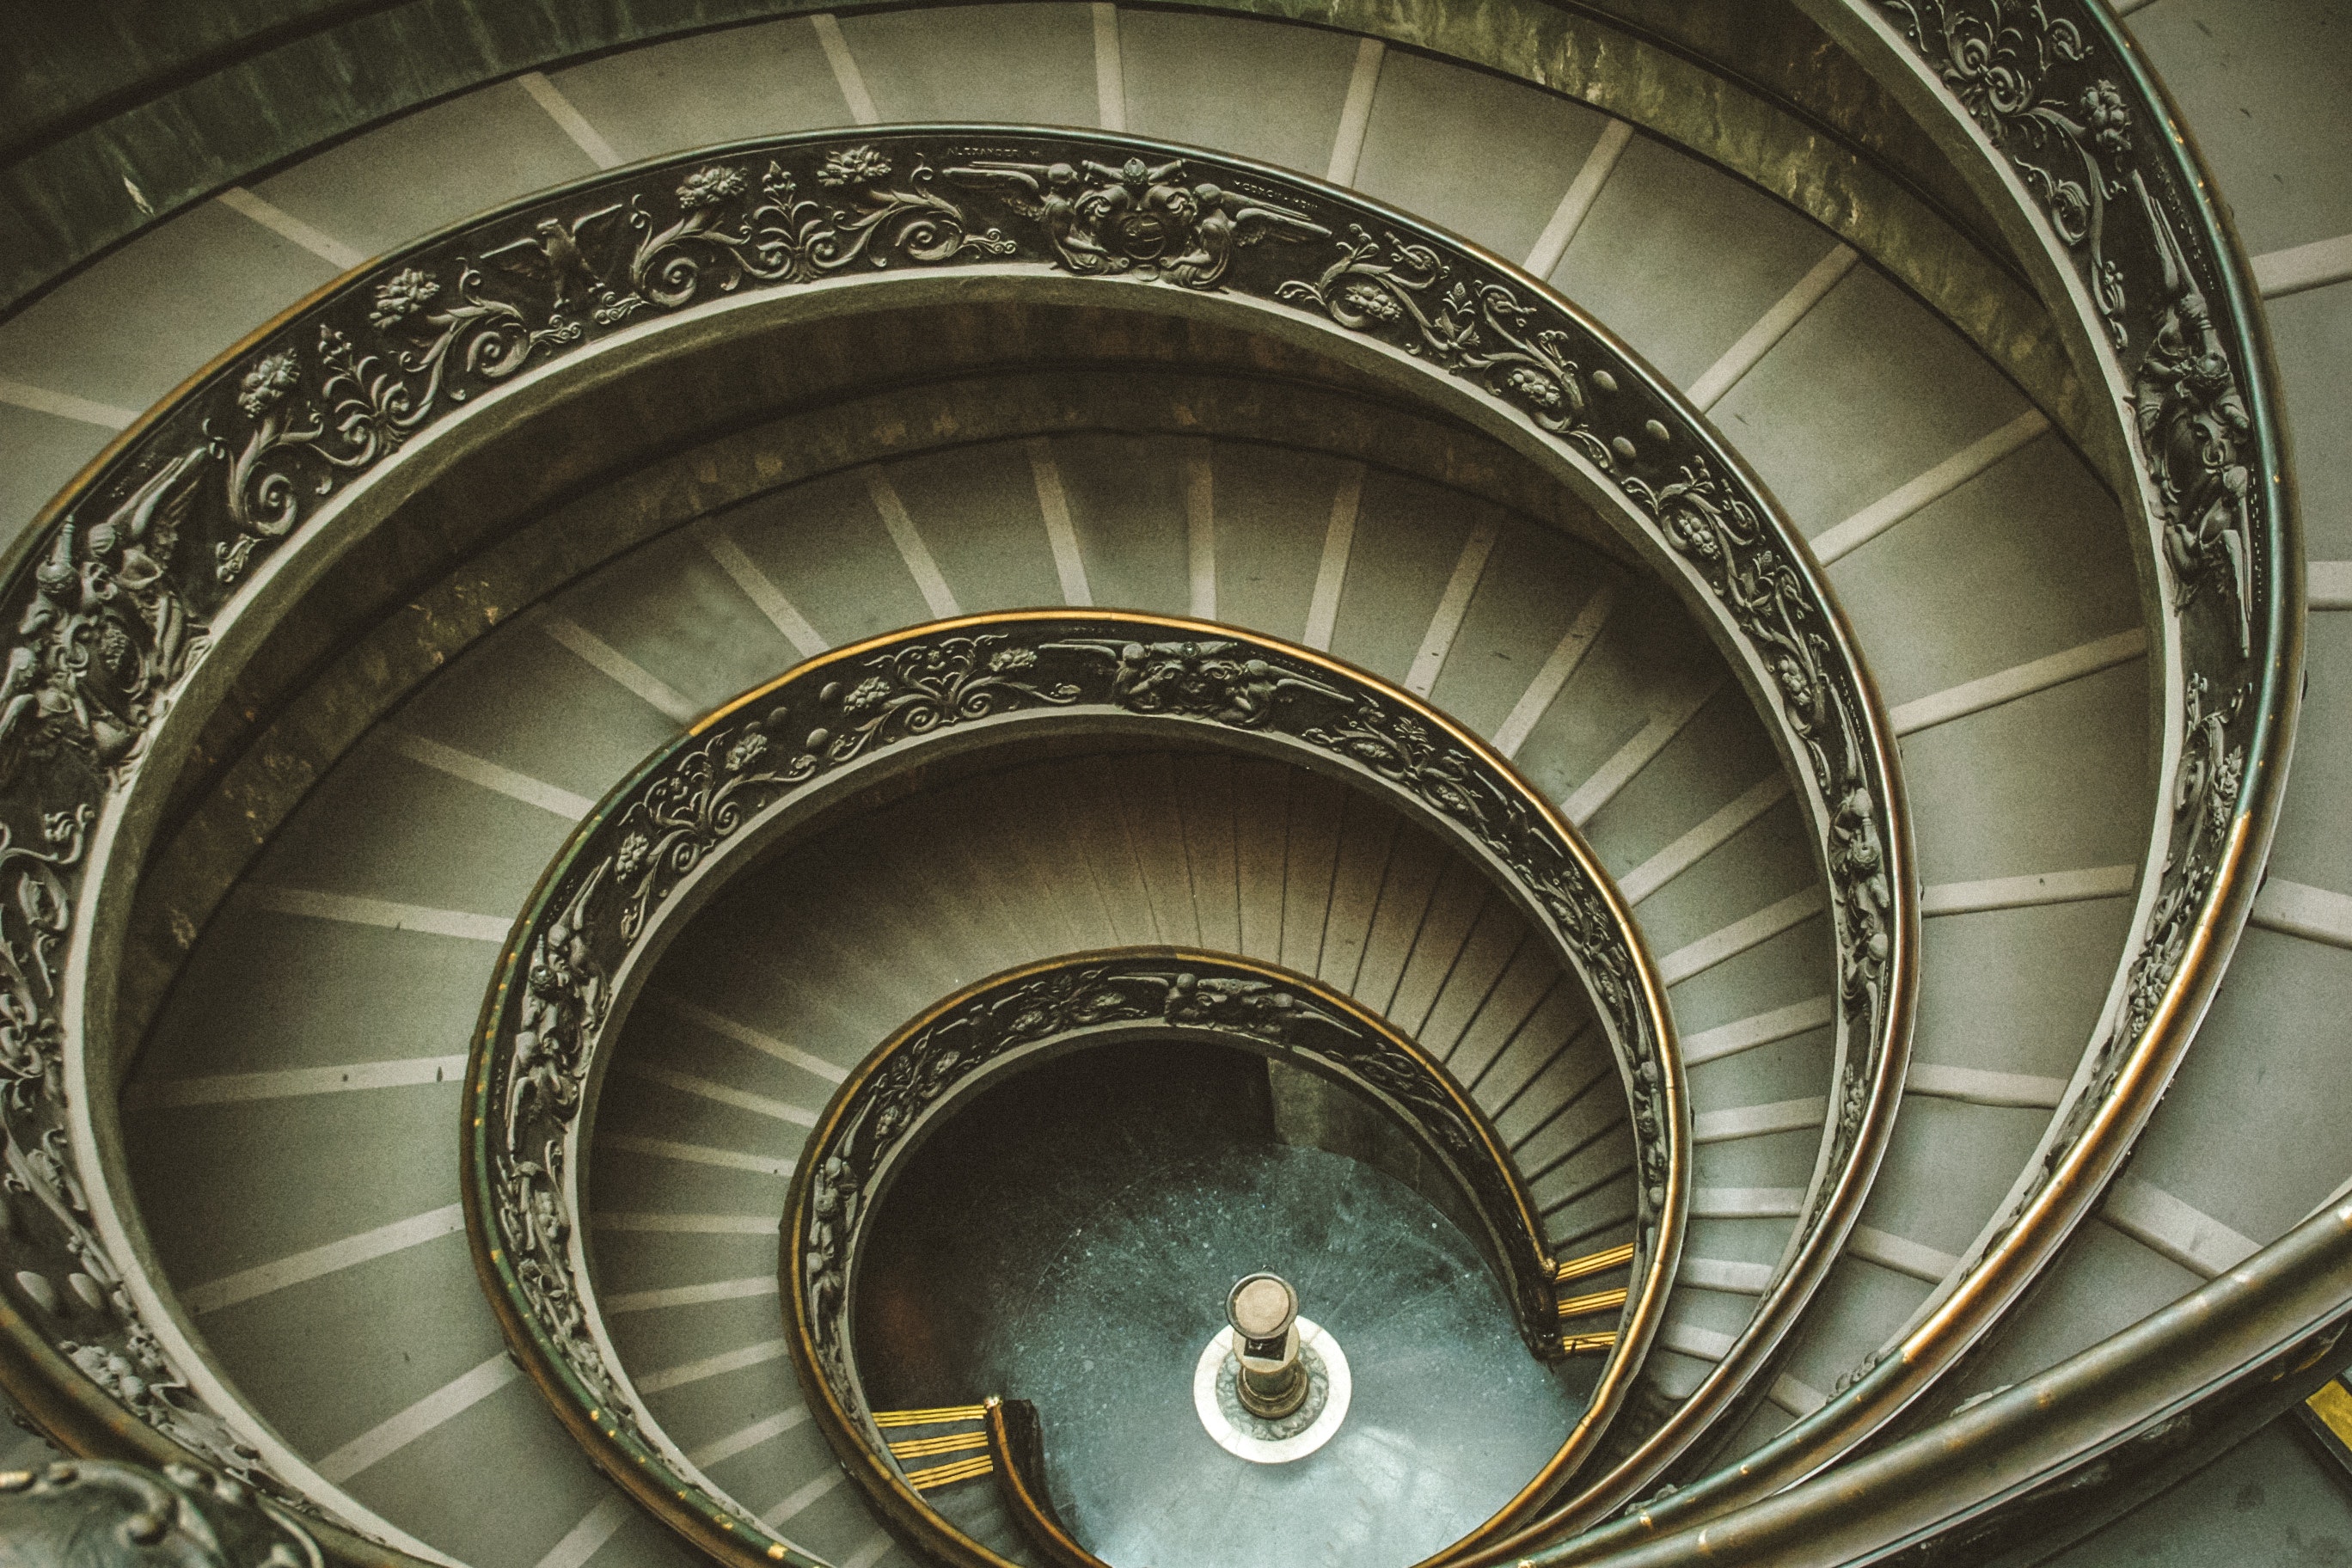 Top view of the monumental spiral staircase of Vatican Museum